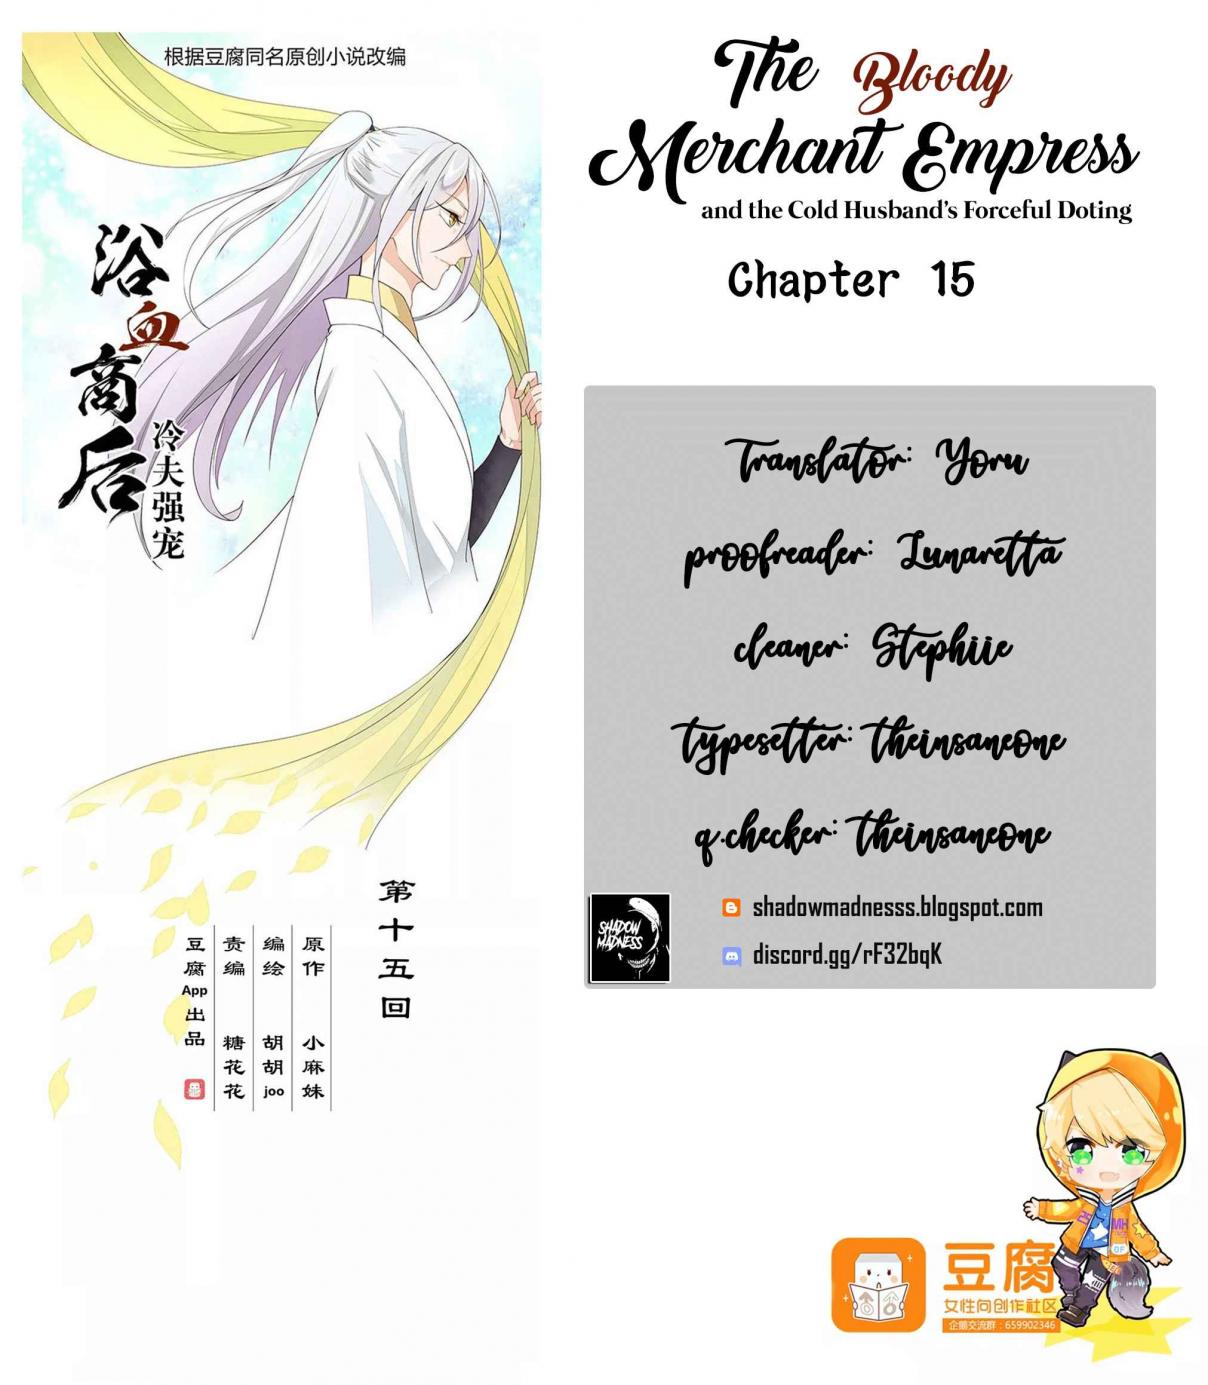 The Bloody Merchant Empress and the Cold Husband's Forceful Doting Ch. 15